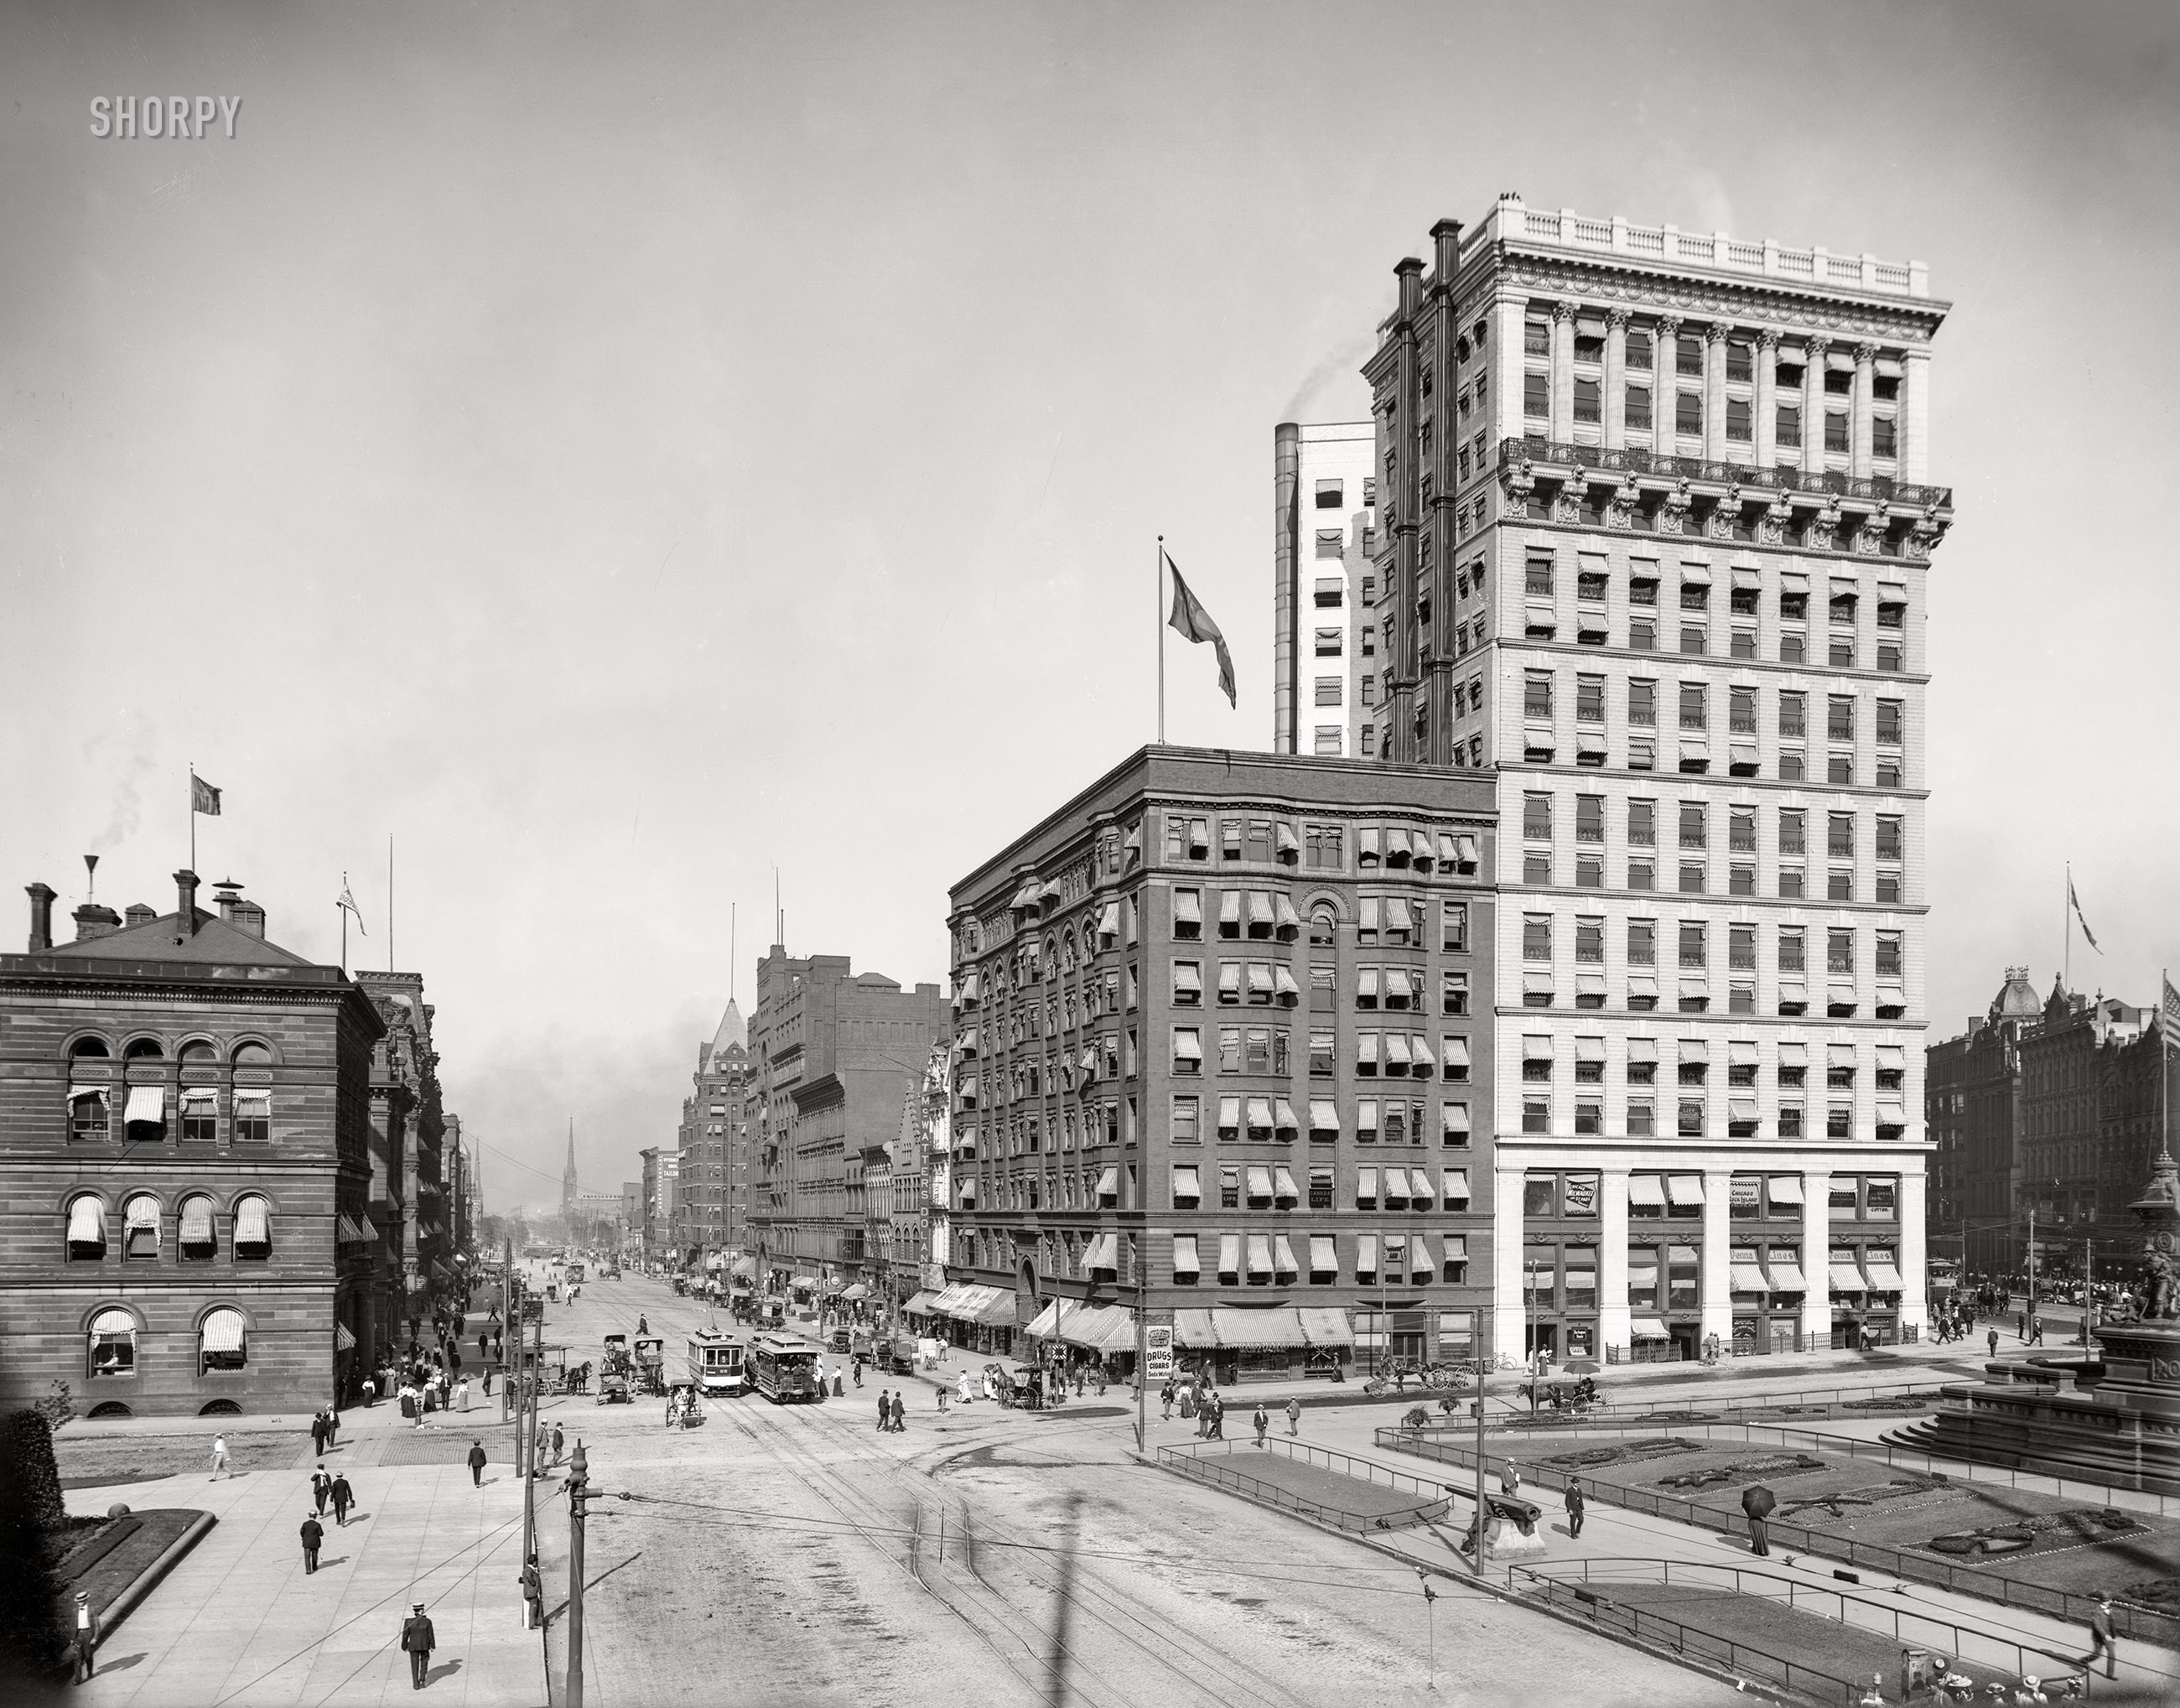 Cleveland circa 1900. "Superior Avenue at City Square." At right, the brand-new Williamson Building. 8x10 inch dry plate glass negative, Detroit Photographic Company. View full size.